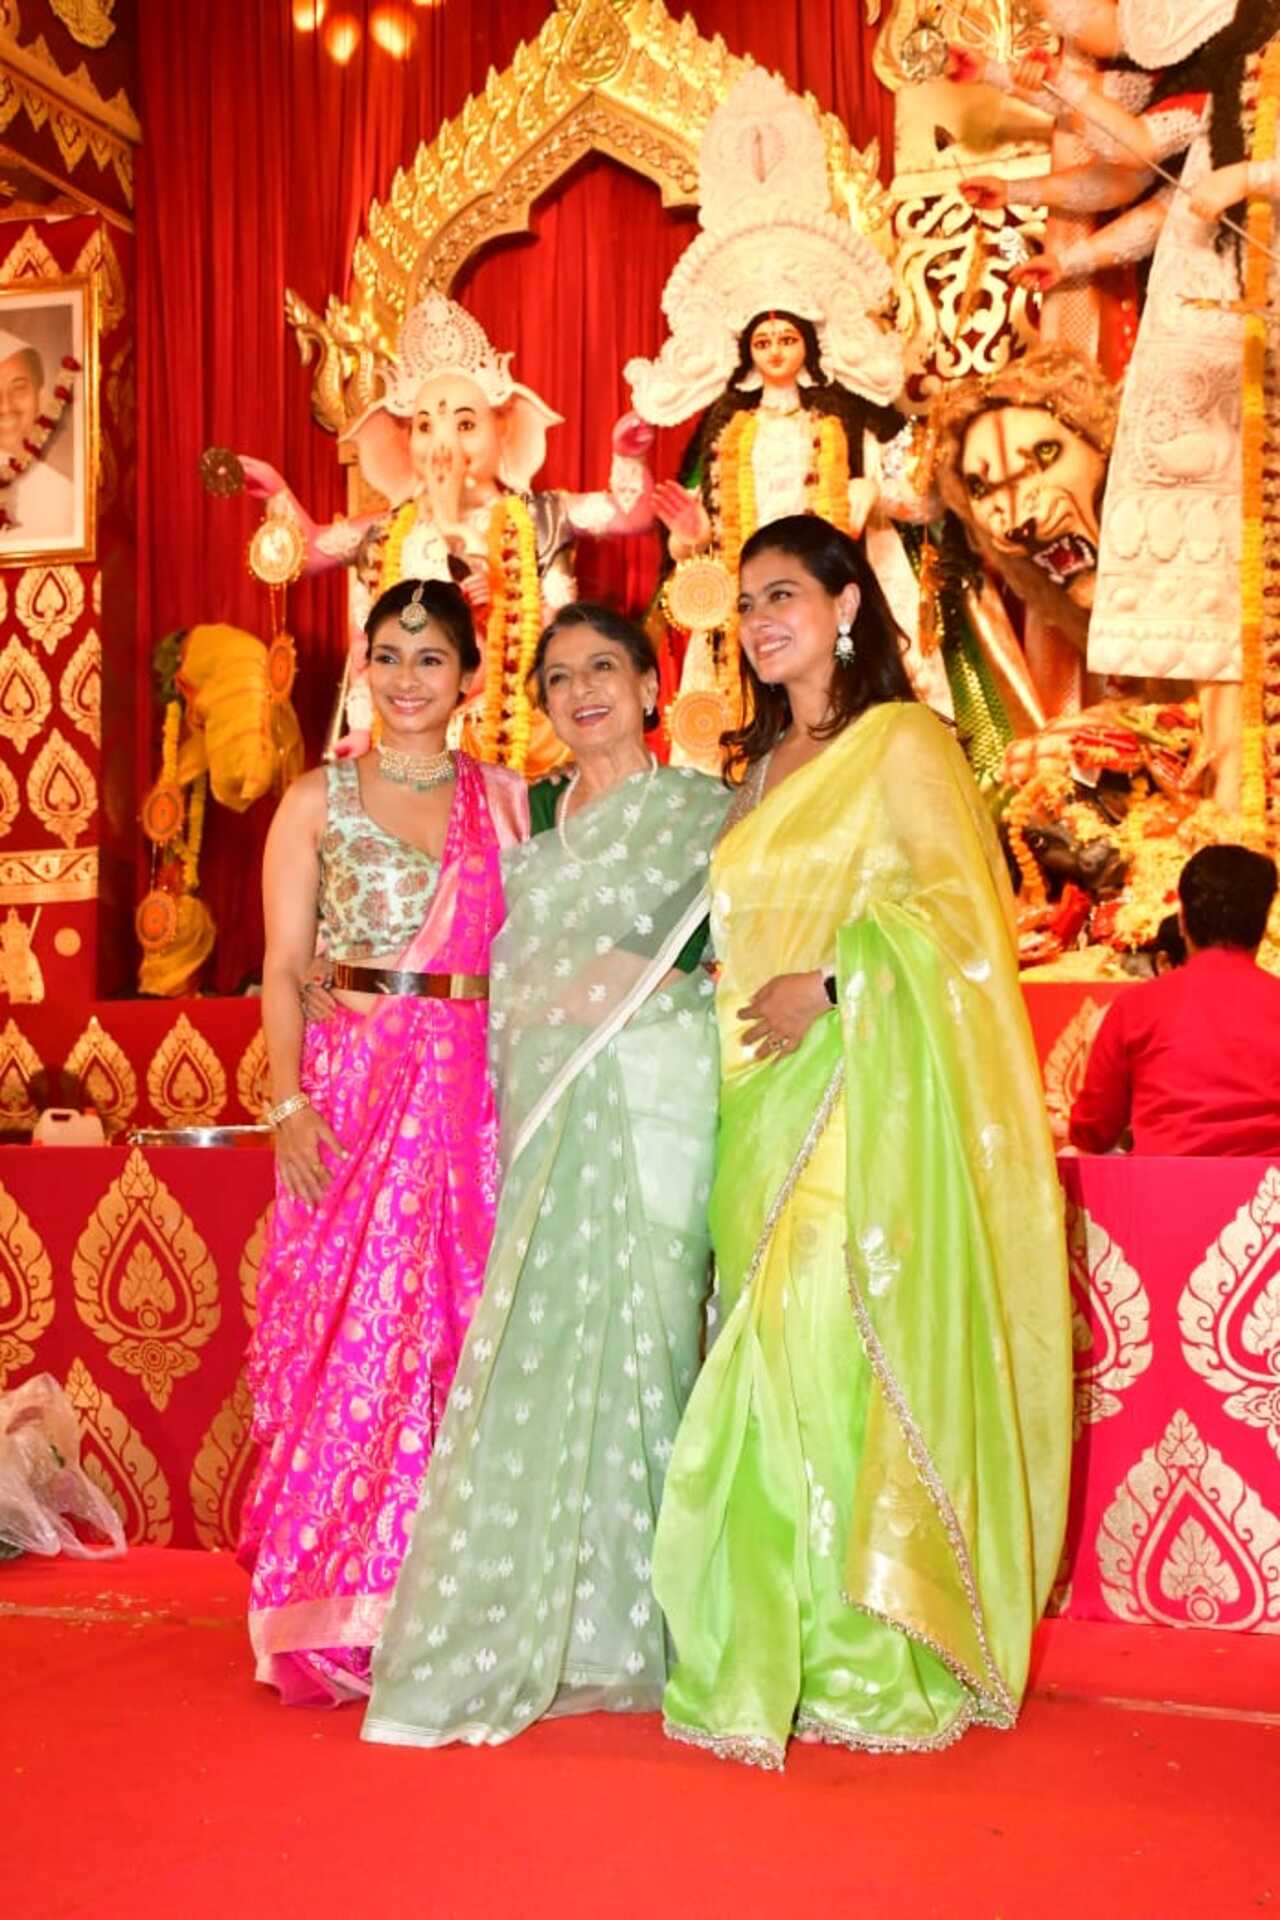 Kajol wore a dual-toned yellow and green saree whereas her younger sister was dressed in a pink saree